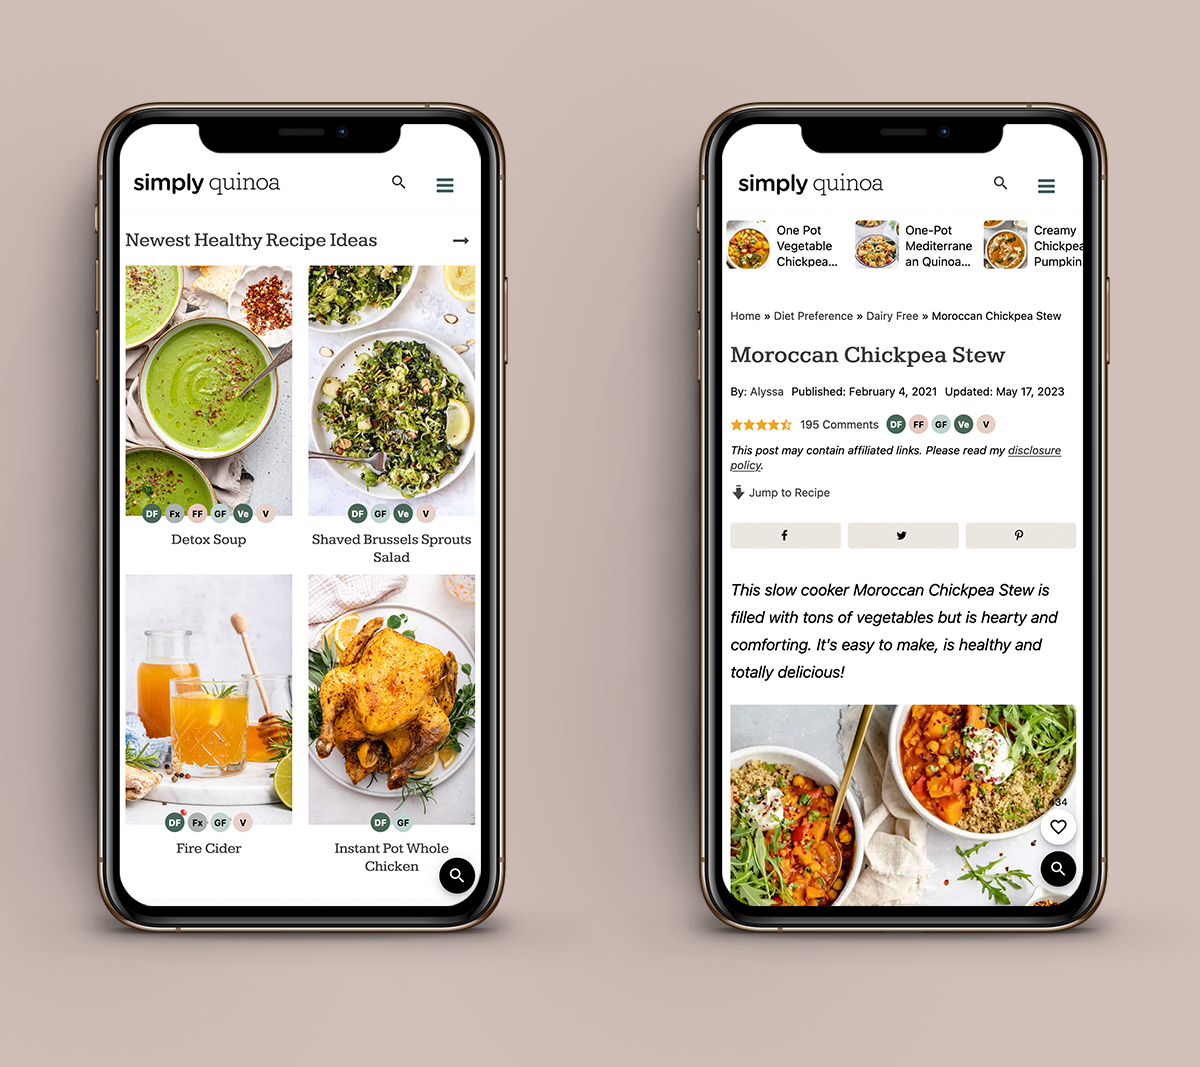 iPhone mockups of the Simply Quinoa website